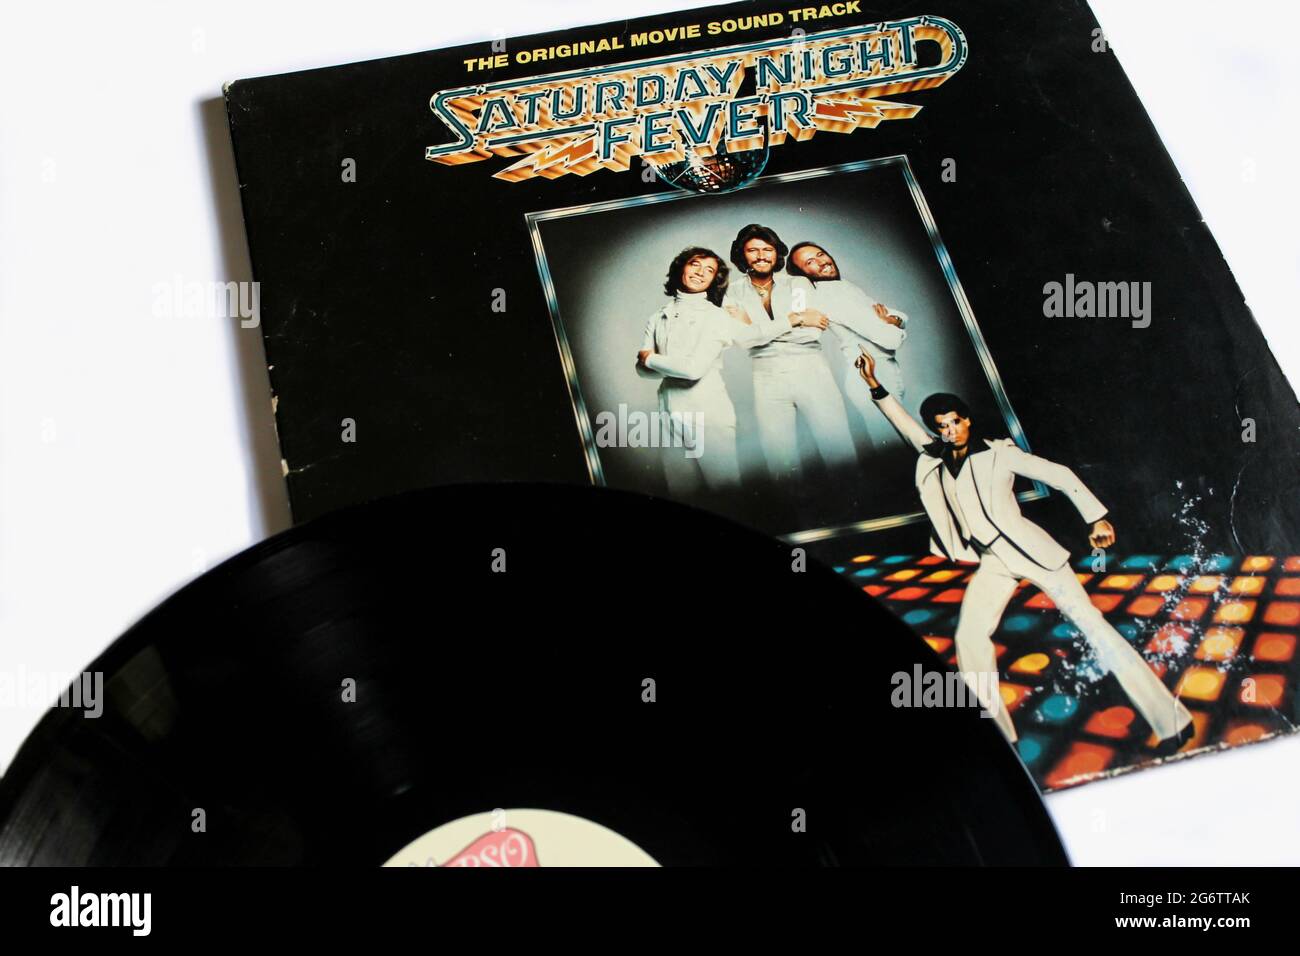 Saturday Night Fever the soundtrack from the film Saturday Night Fever starring John Travolta music from the Bee Gees. Disco and soul album cover vinyl Stock Photo